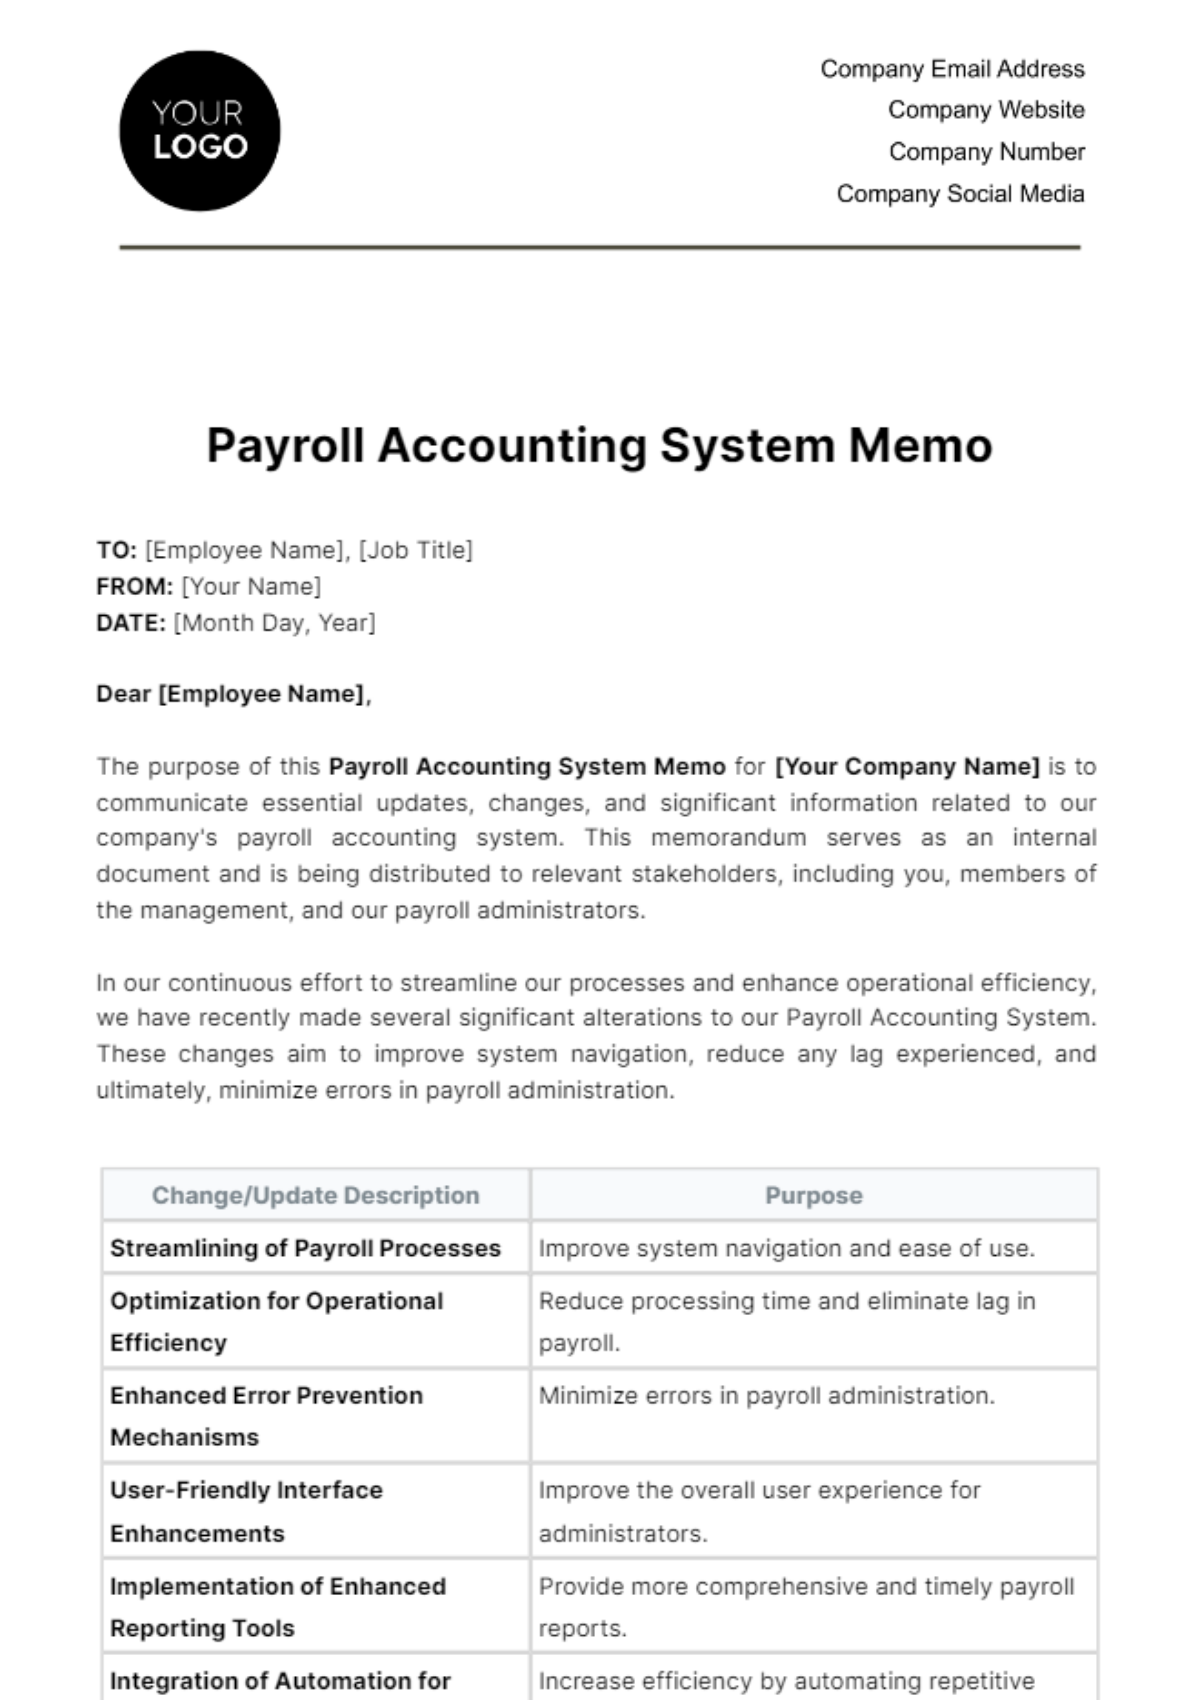 Payroll Accounting System Memo Template